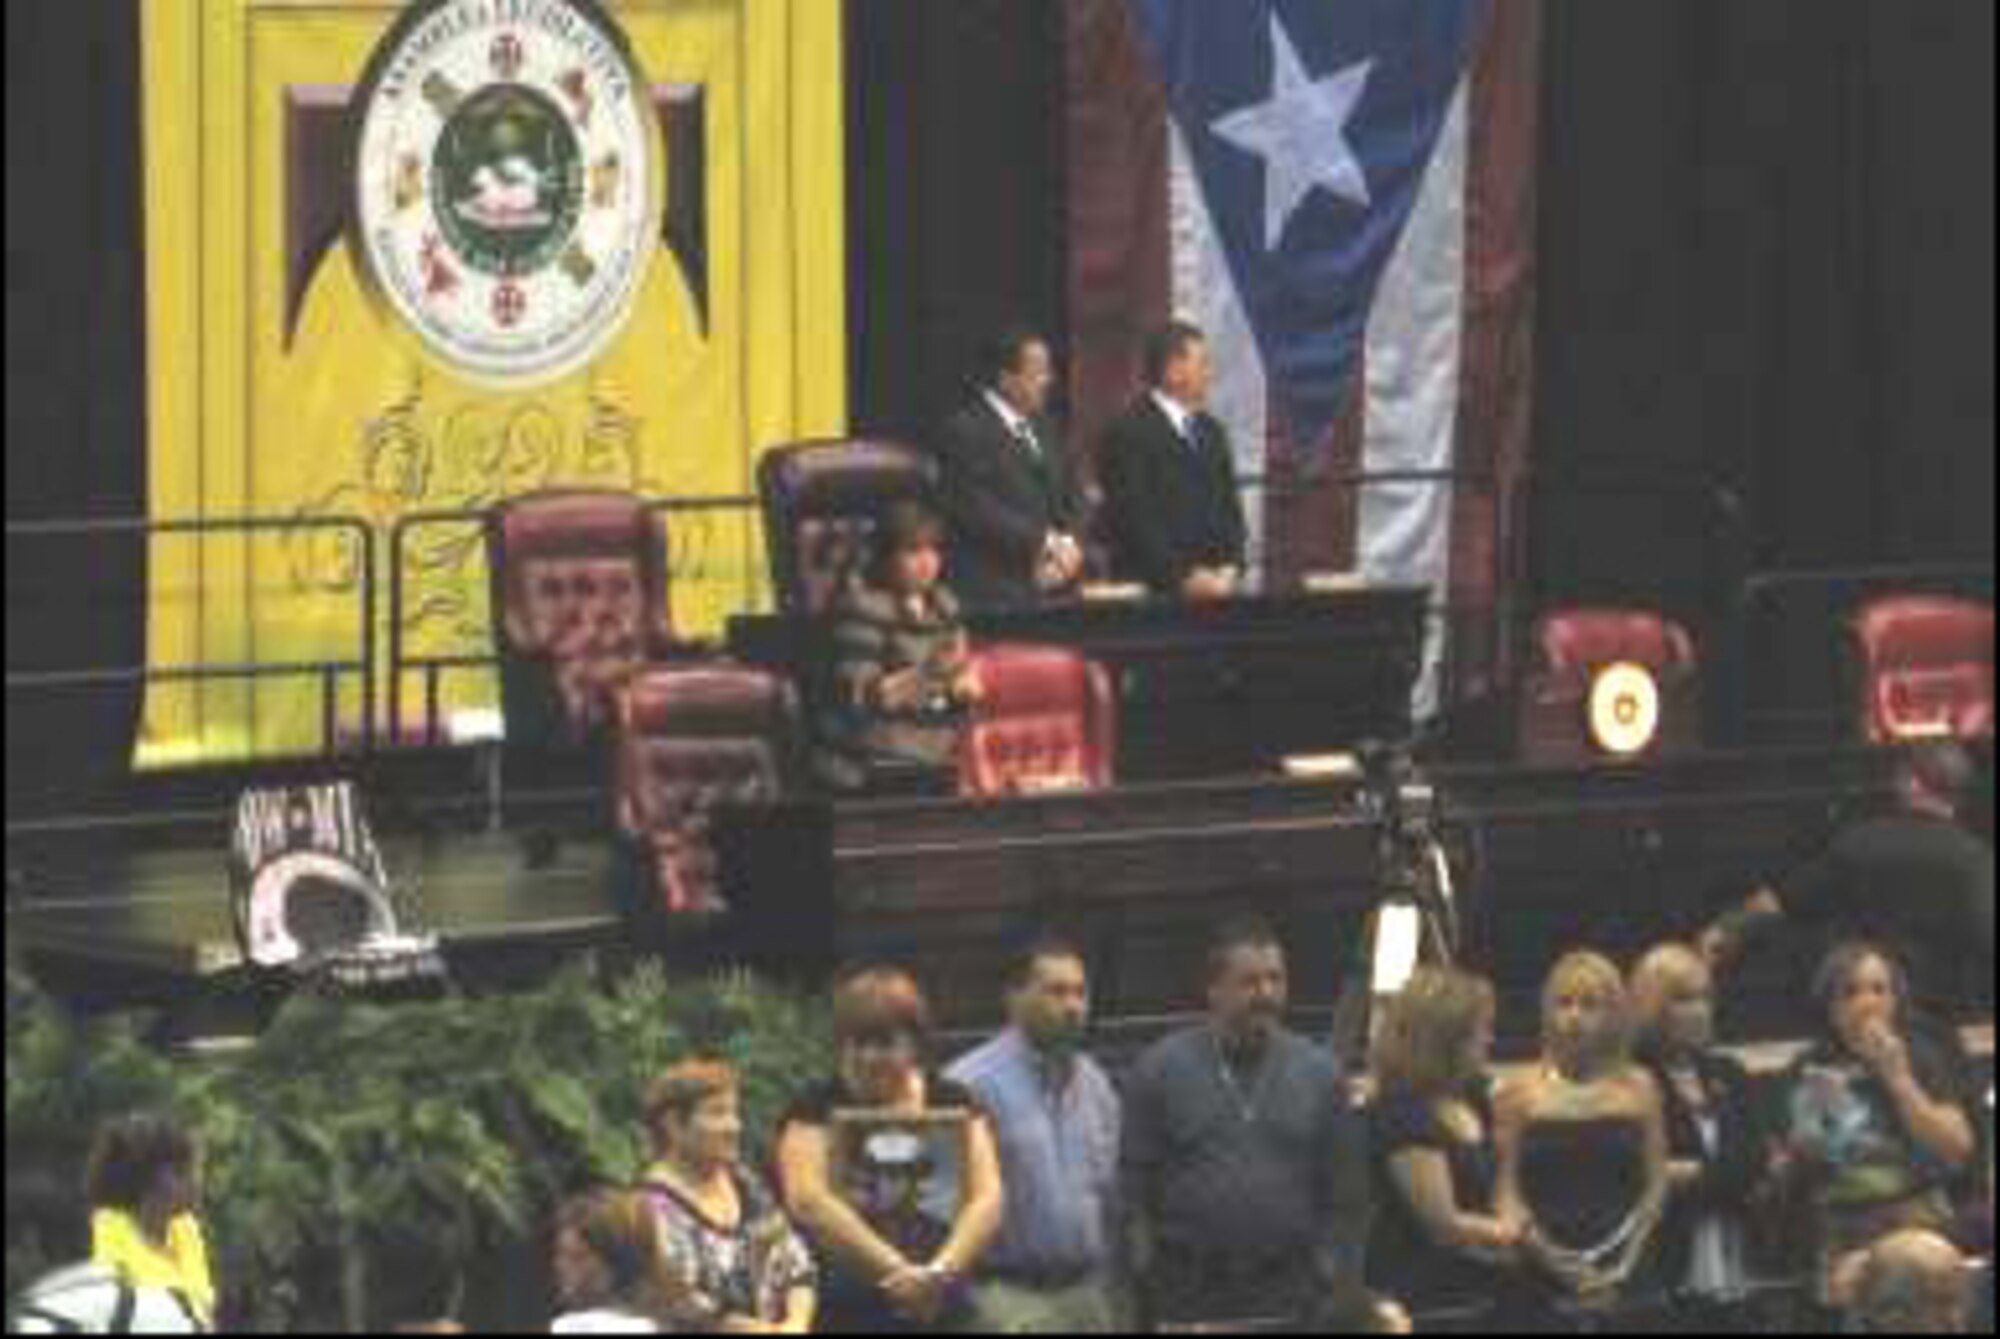 The activity “Defensores de la Libertad,” as it was called, took place at the Roberto Clemente’s Coliseum in San Juan, Puerto Rico were the President of the Senate, Hon. Kenneth McClintock, and the President for the House of Representatives, Hon. Jose Aponte presided the event. Around 10 a.m. citizen soldiers of the Army Reserve, Puerto Rico National Guard and families were present. Our Tanya E. Regenauer, Staff Sgt., PRANG Pay Entitlements Technician, assisted in showing the blue Air Force uniform supporting her husband SGT David Martell from B Company 192th SPT Battallion.